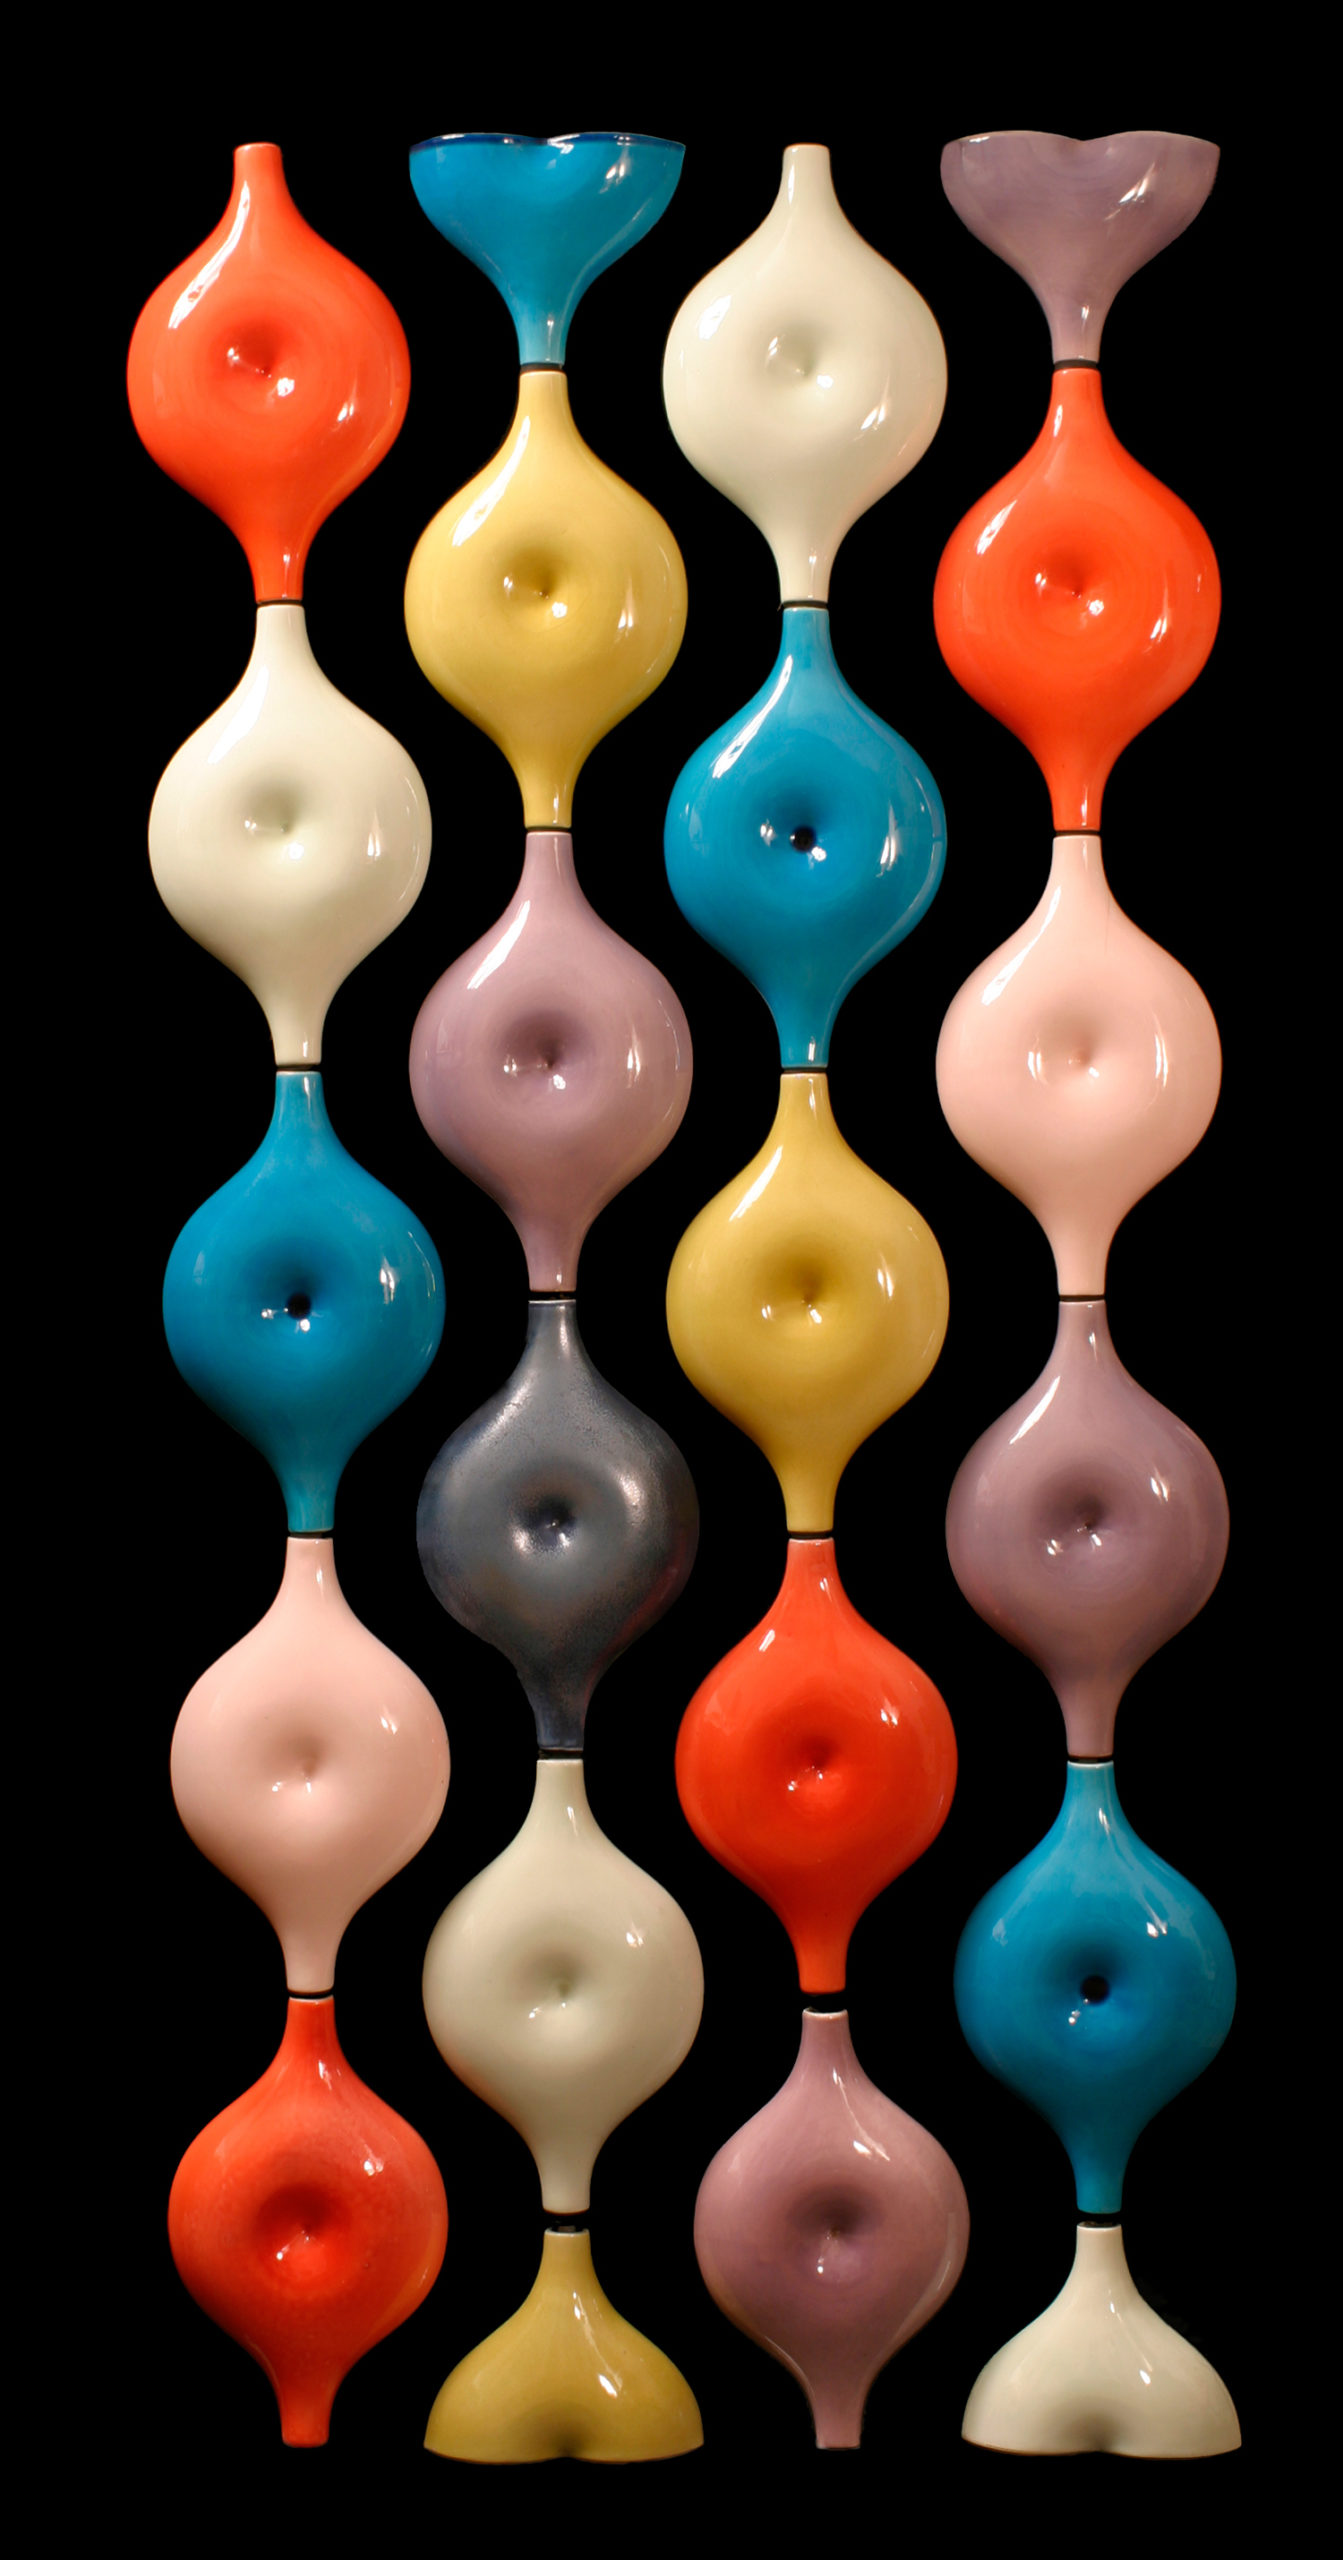 Round shapes with dimples in the middle that resemble the belly button from the human body in candy-colored glazes that are stacked in four vertical rows of to create S-shaped lines.